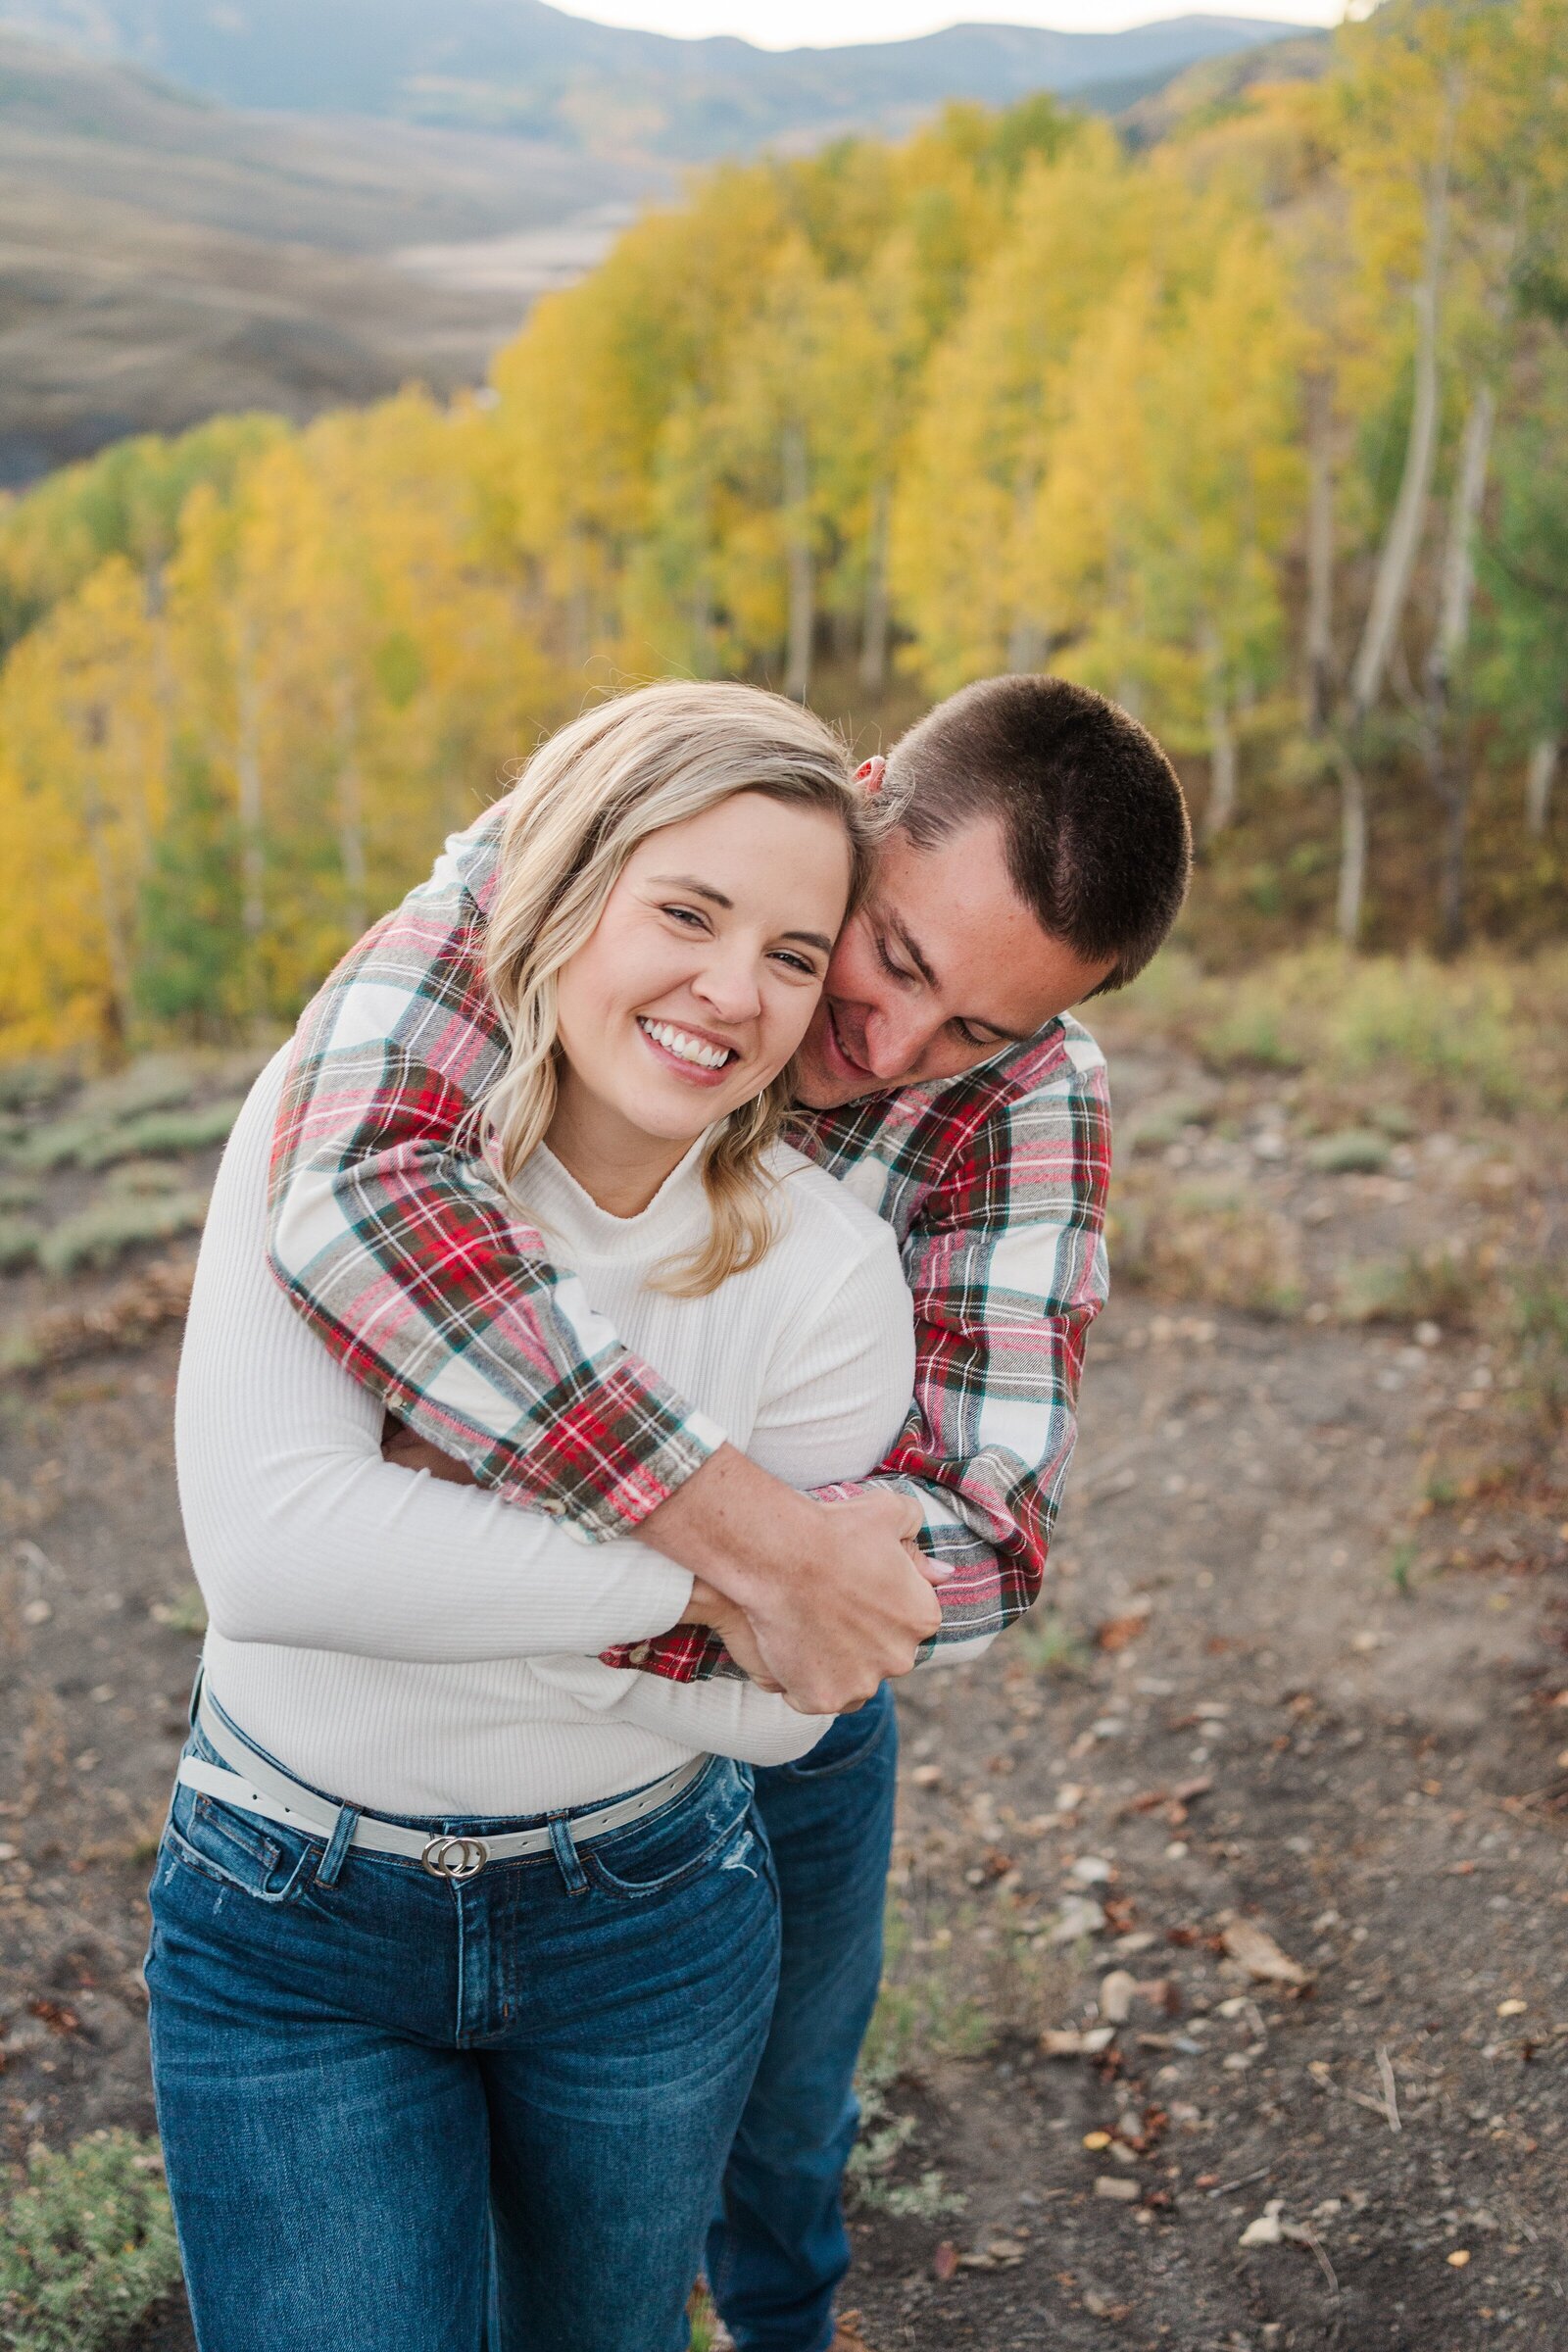 Documenting the Joy of Your Mountain Wedding" - Mountain wedding photography, outdoor wedding photography, authentic storytelling, professional photography services